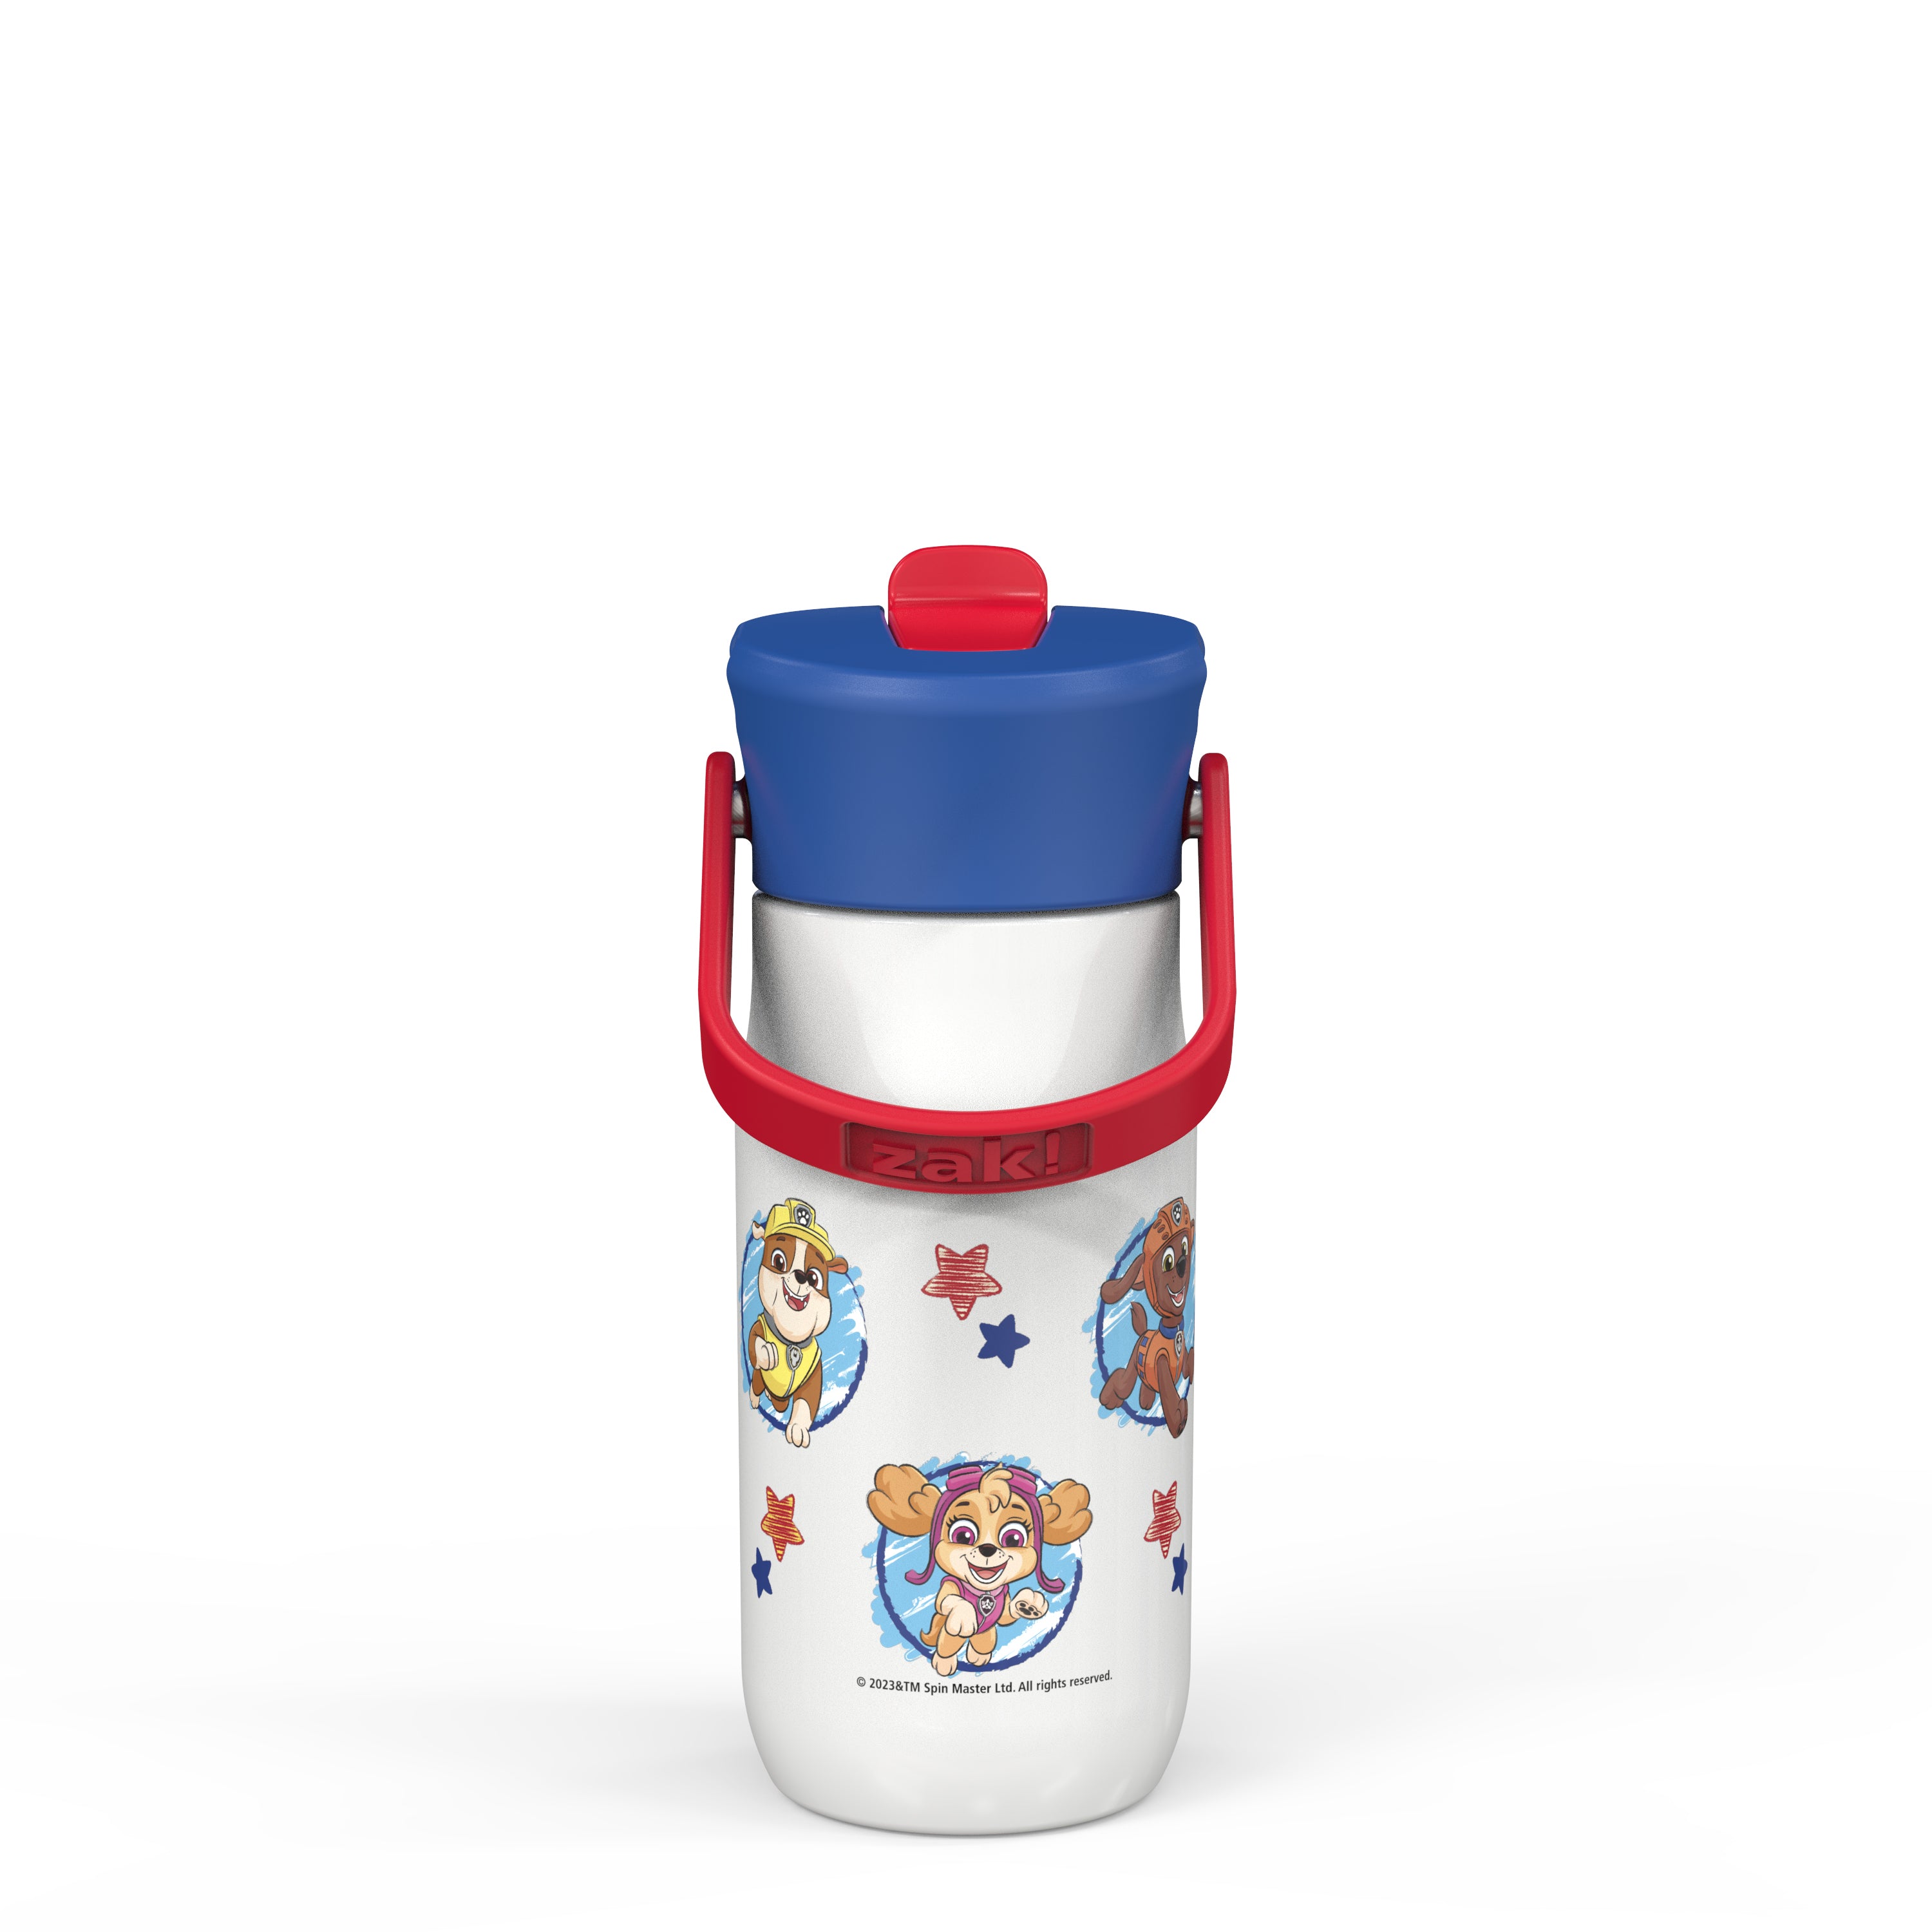 PAW Patrol Harmony Recycled Stainless Steel Kids Water Bottle with Straw Spout, 14 ounces